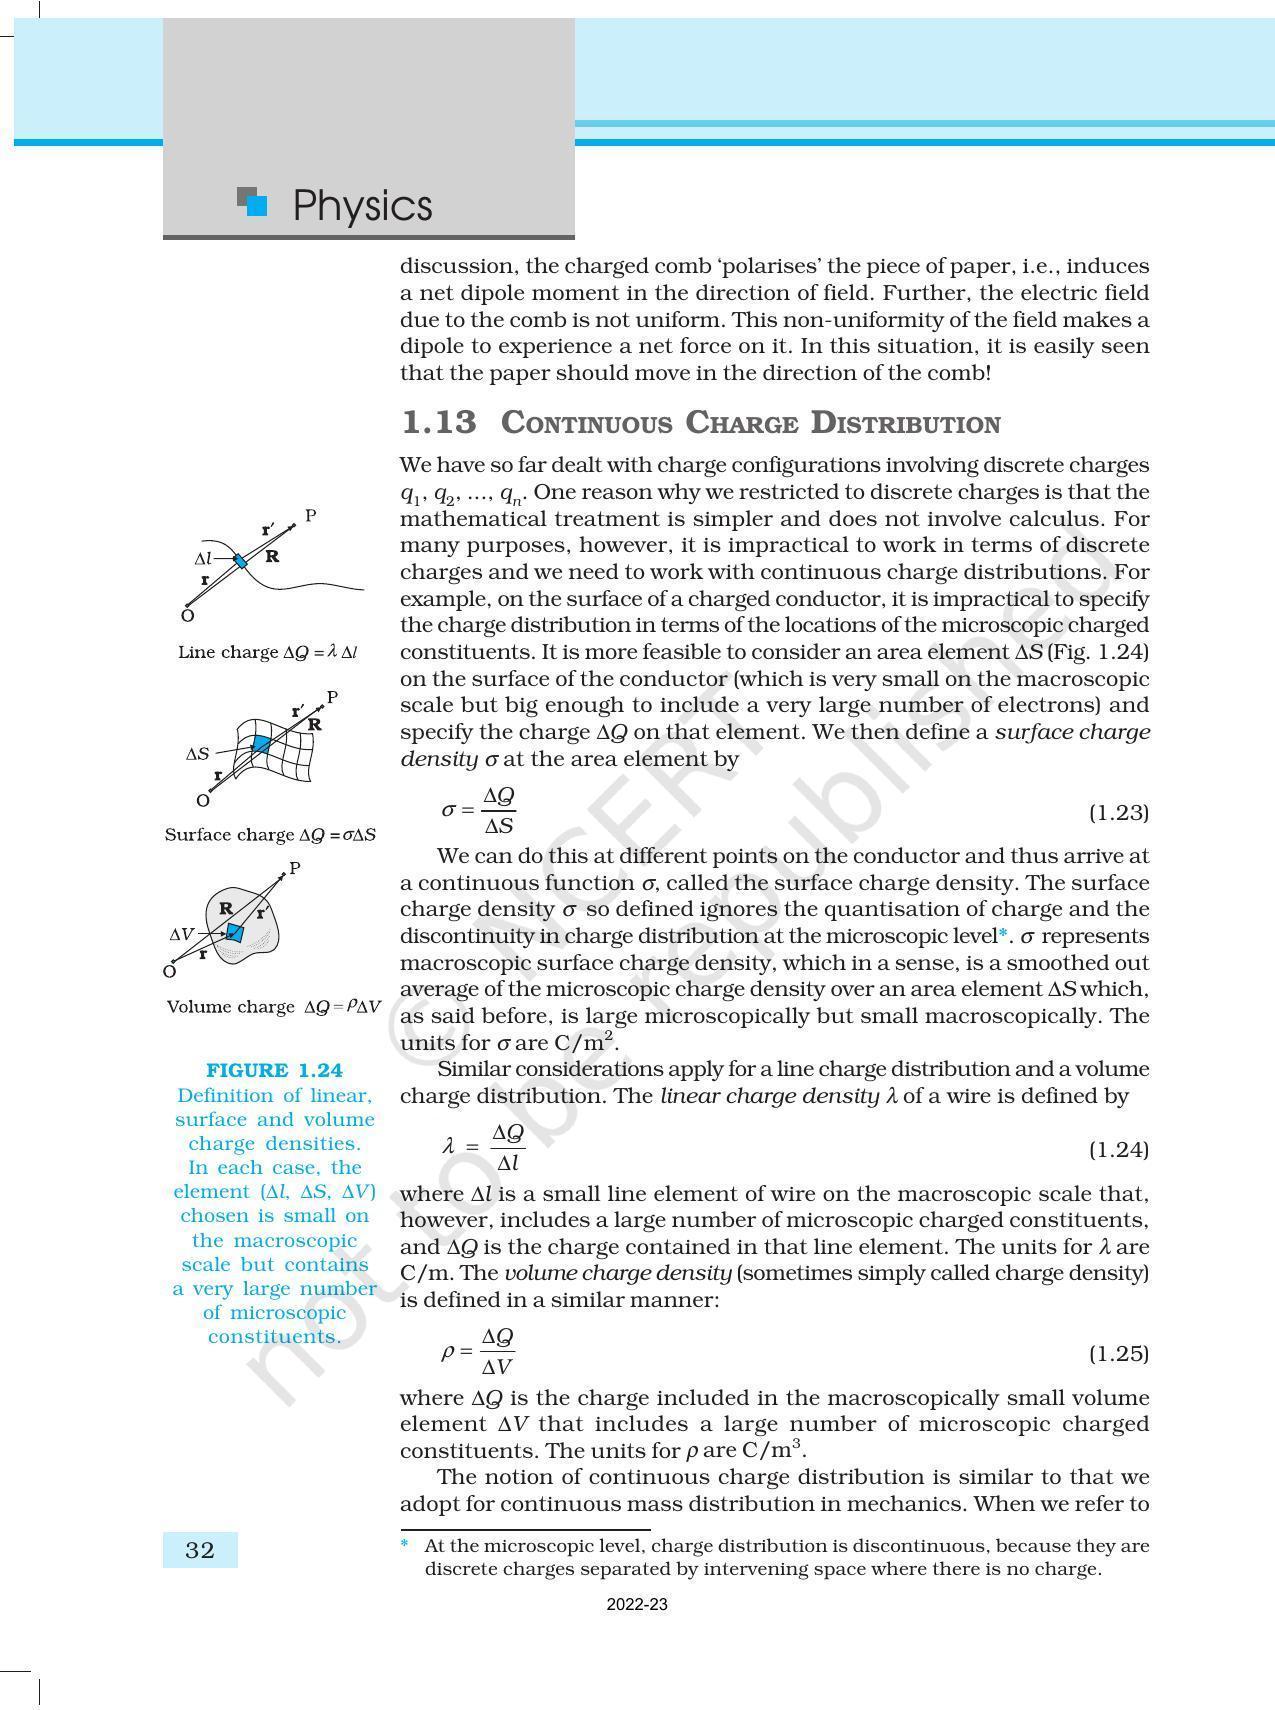 NCERT Book for Class 12 Physics Chapter 1 Electric Charges and Fields - Page 32